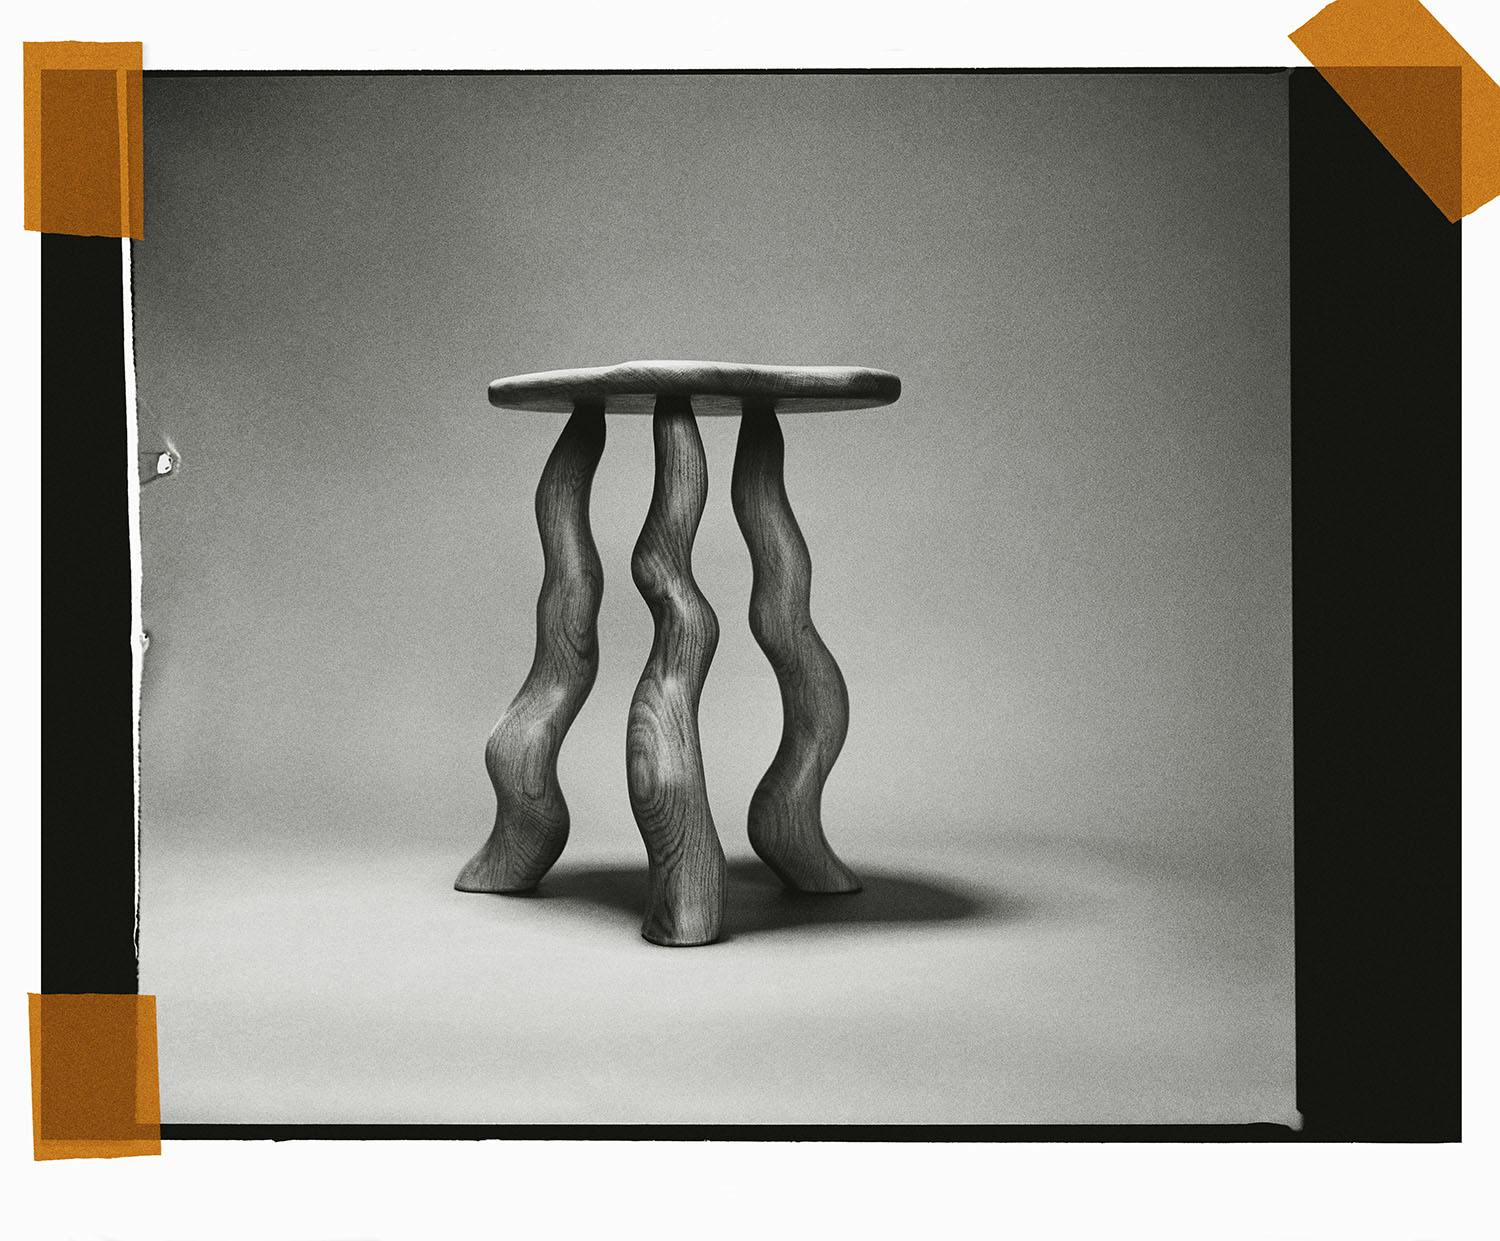 Wilenson and Rivera Stool Photo by Catherine Hyland